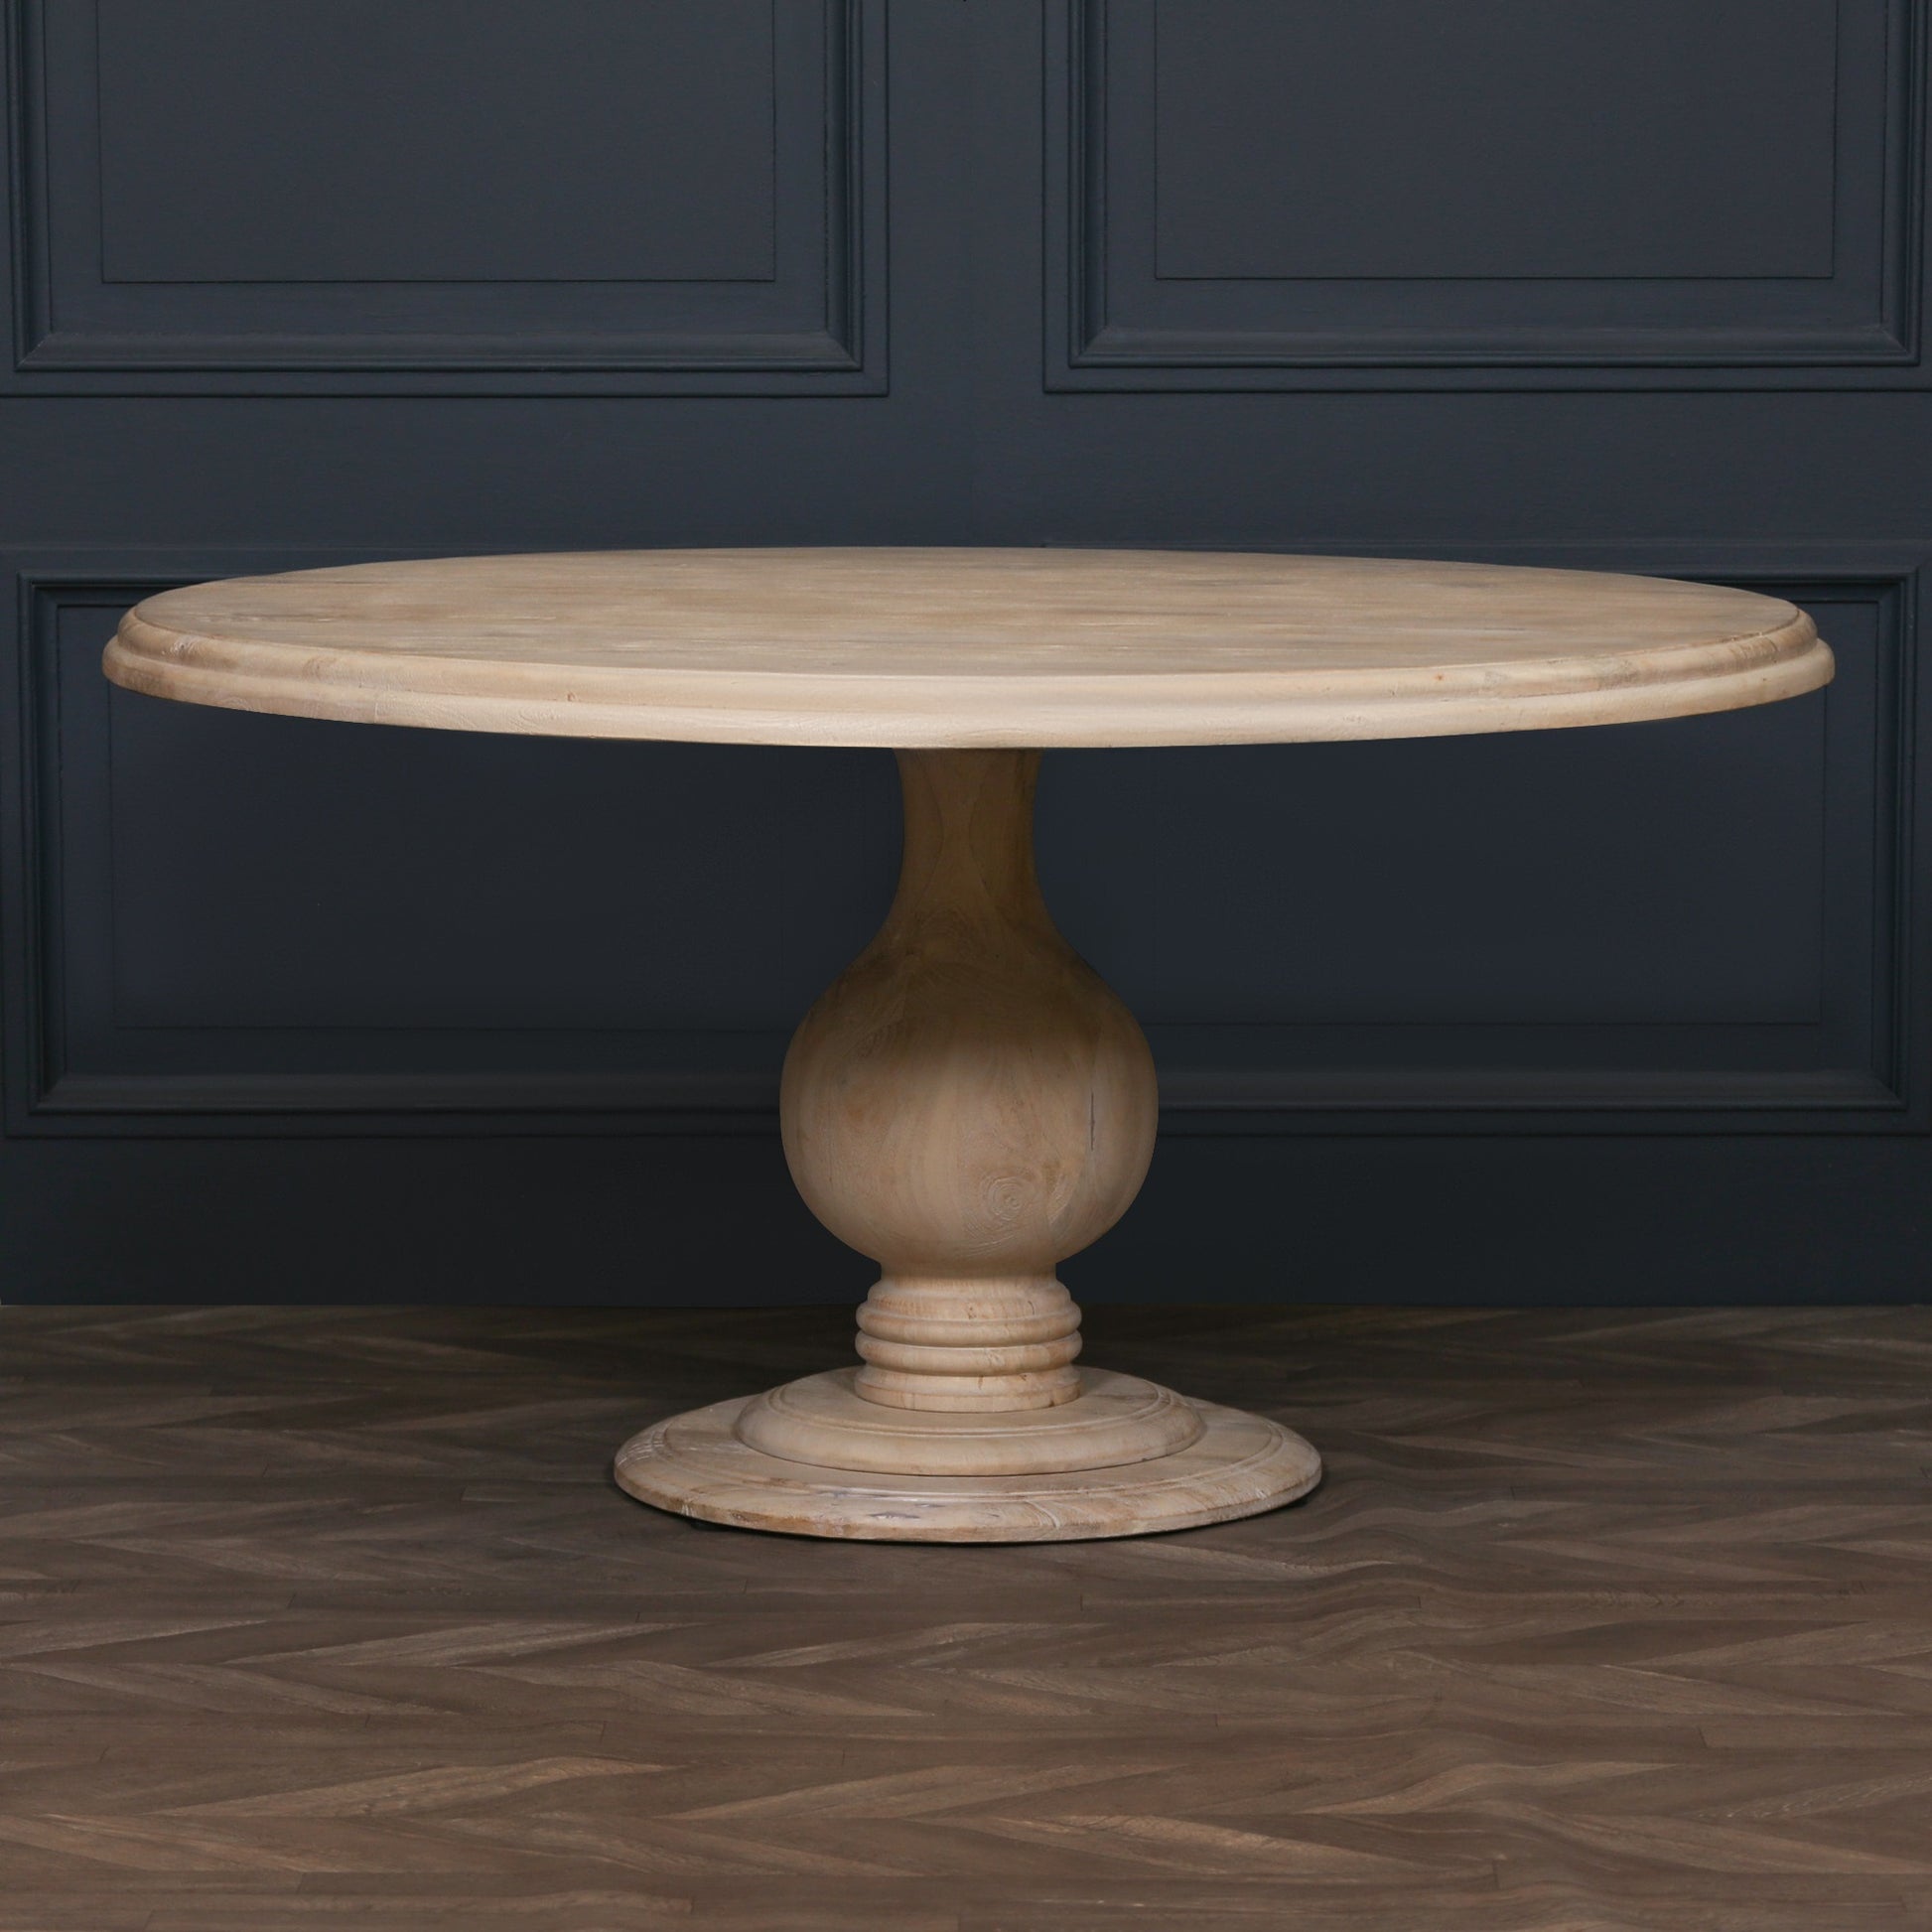 Blanche Wooden Round Dining Table 152cm CasaFenix